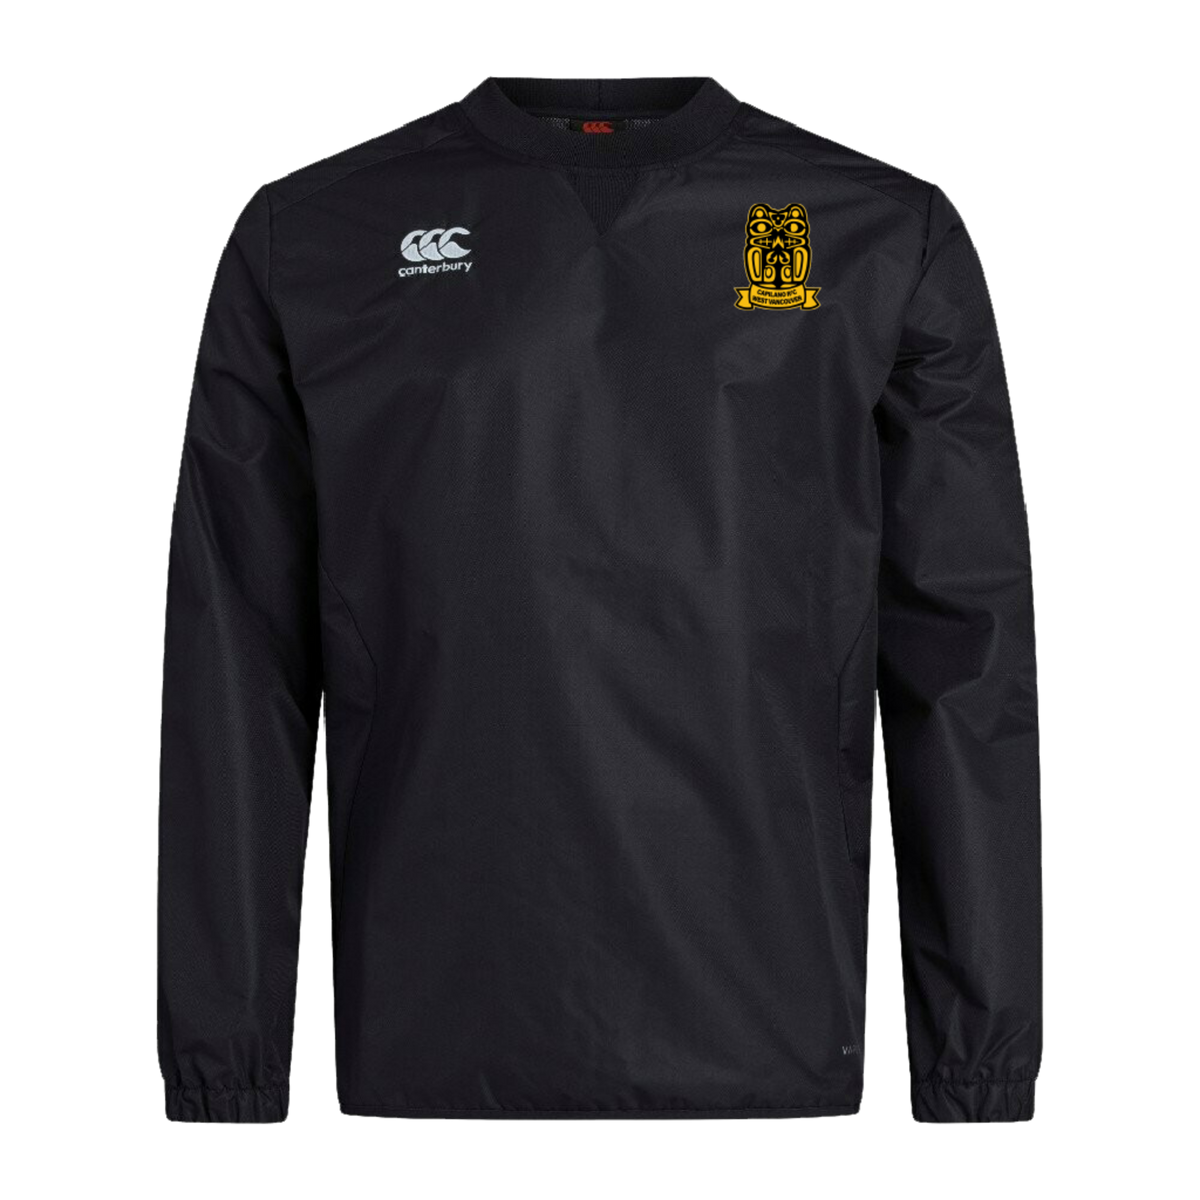 Capilano RFC Club Contact Top - The Rugby Shop The Rugby Shop MEN&#39;S / BLACK / XS TRS Distribution Canada Contact Top Capilano RFC Club Contact Top